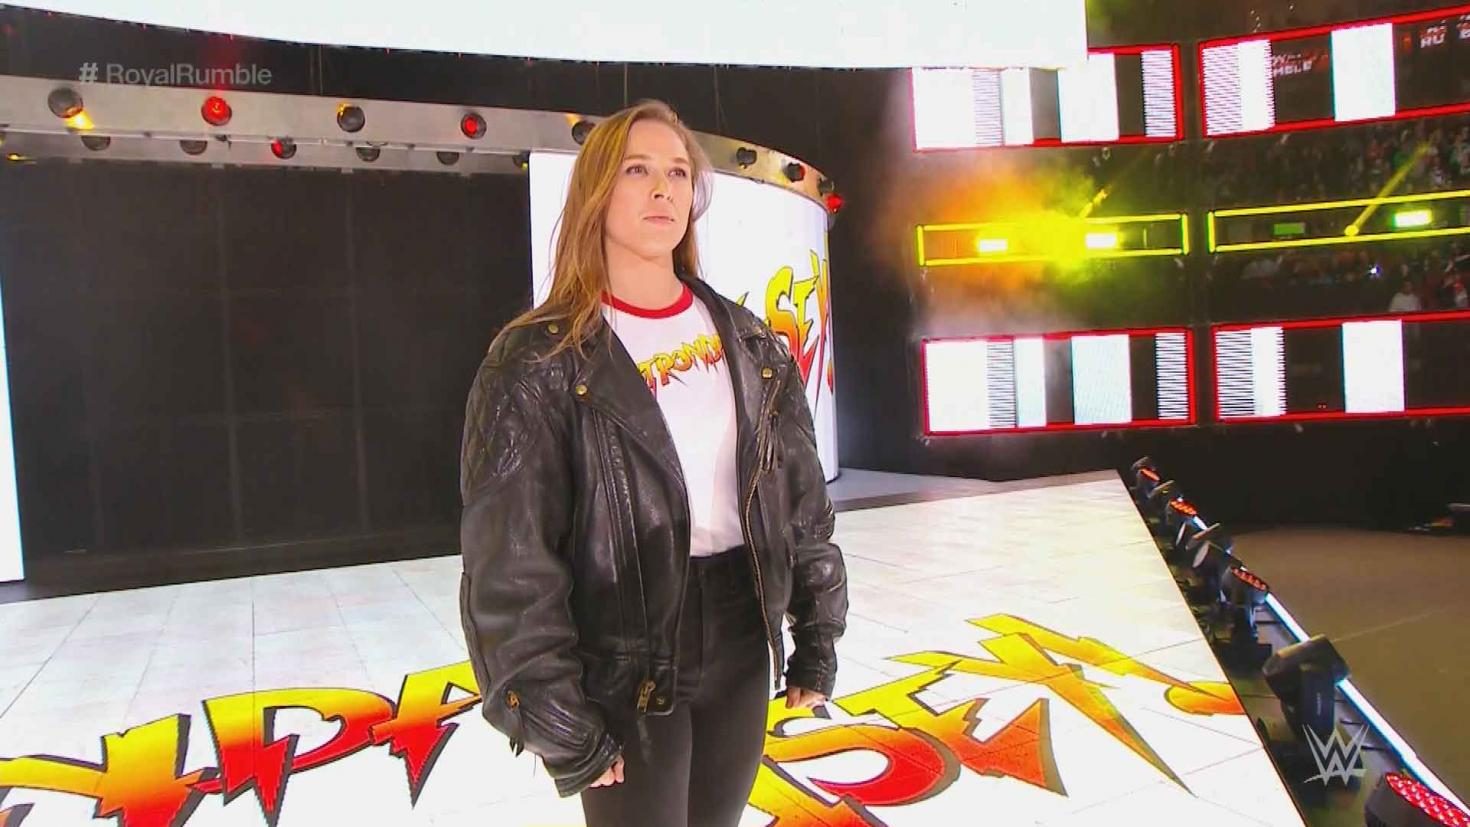 Ronda Rousey signs with WWE, appears after women’s Royal Rumble